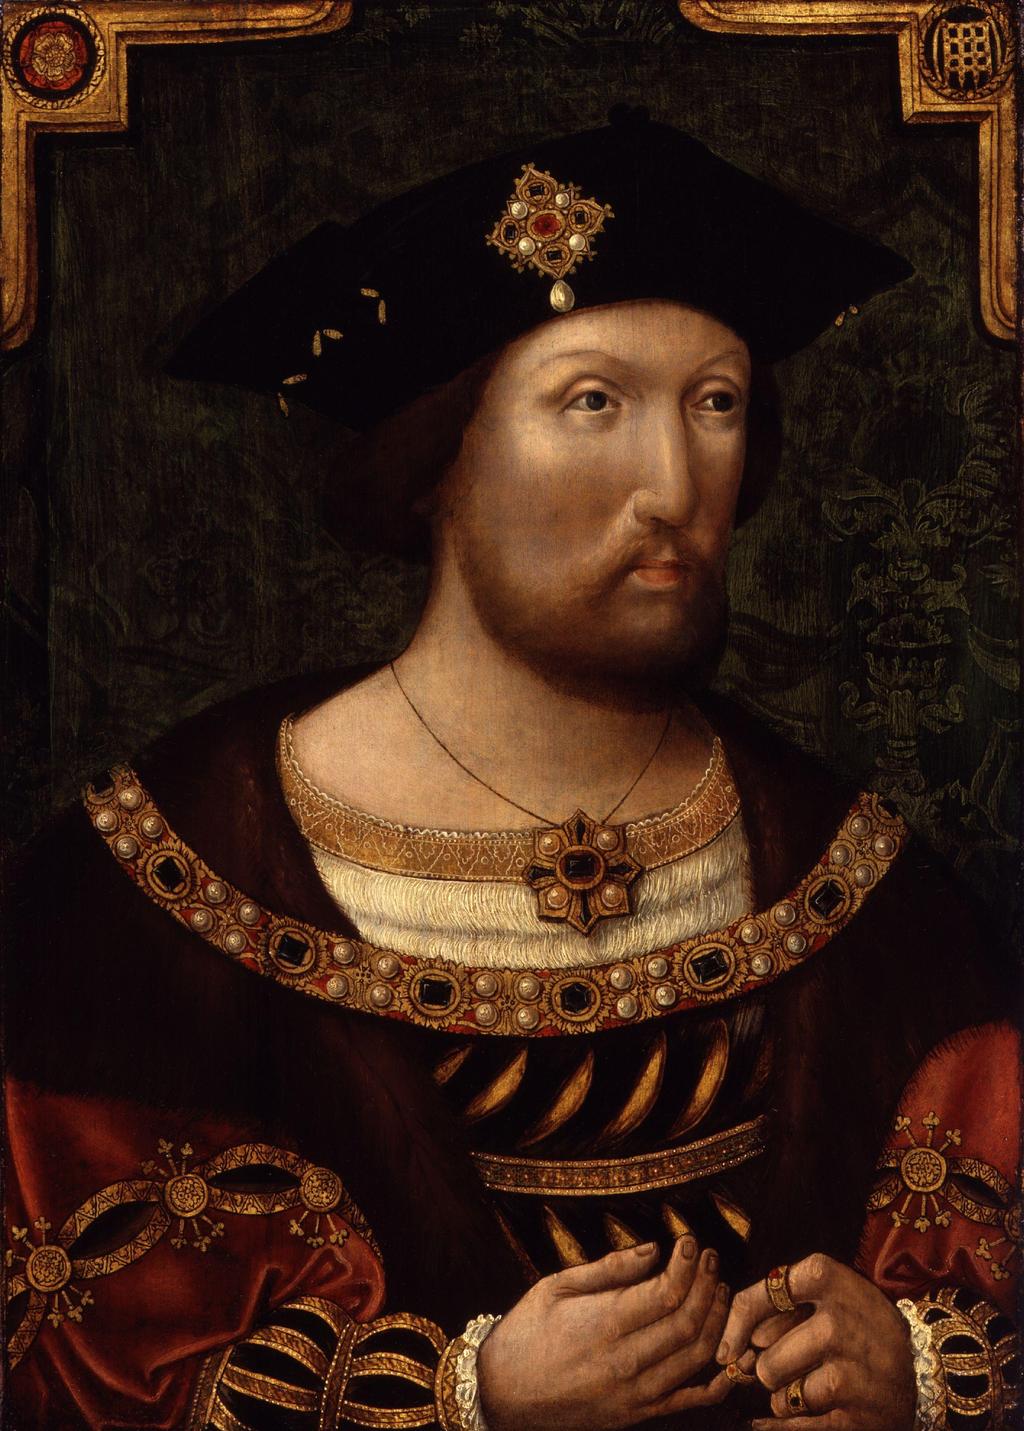 King Henry VIII of England Unknown artist, c. 1520. Here is King Henry VIII of England, which shows similarities in fashion styles to the previous image of King Francois I of France.